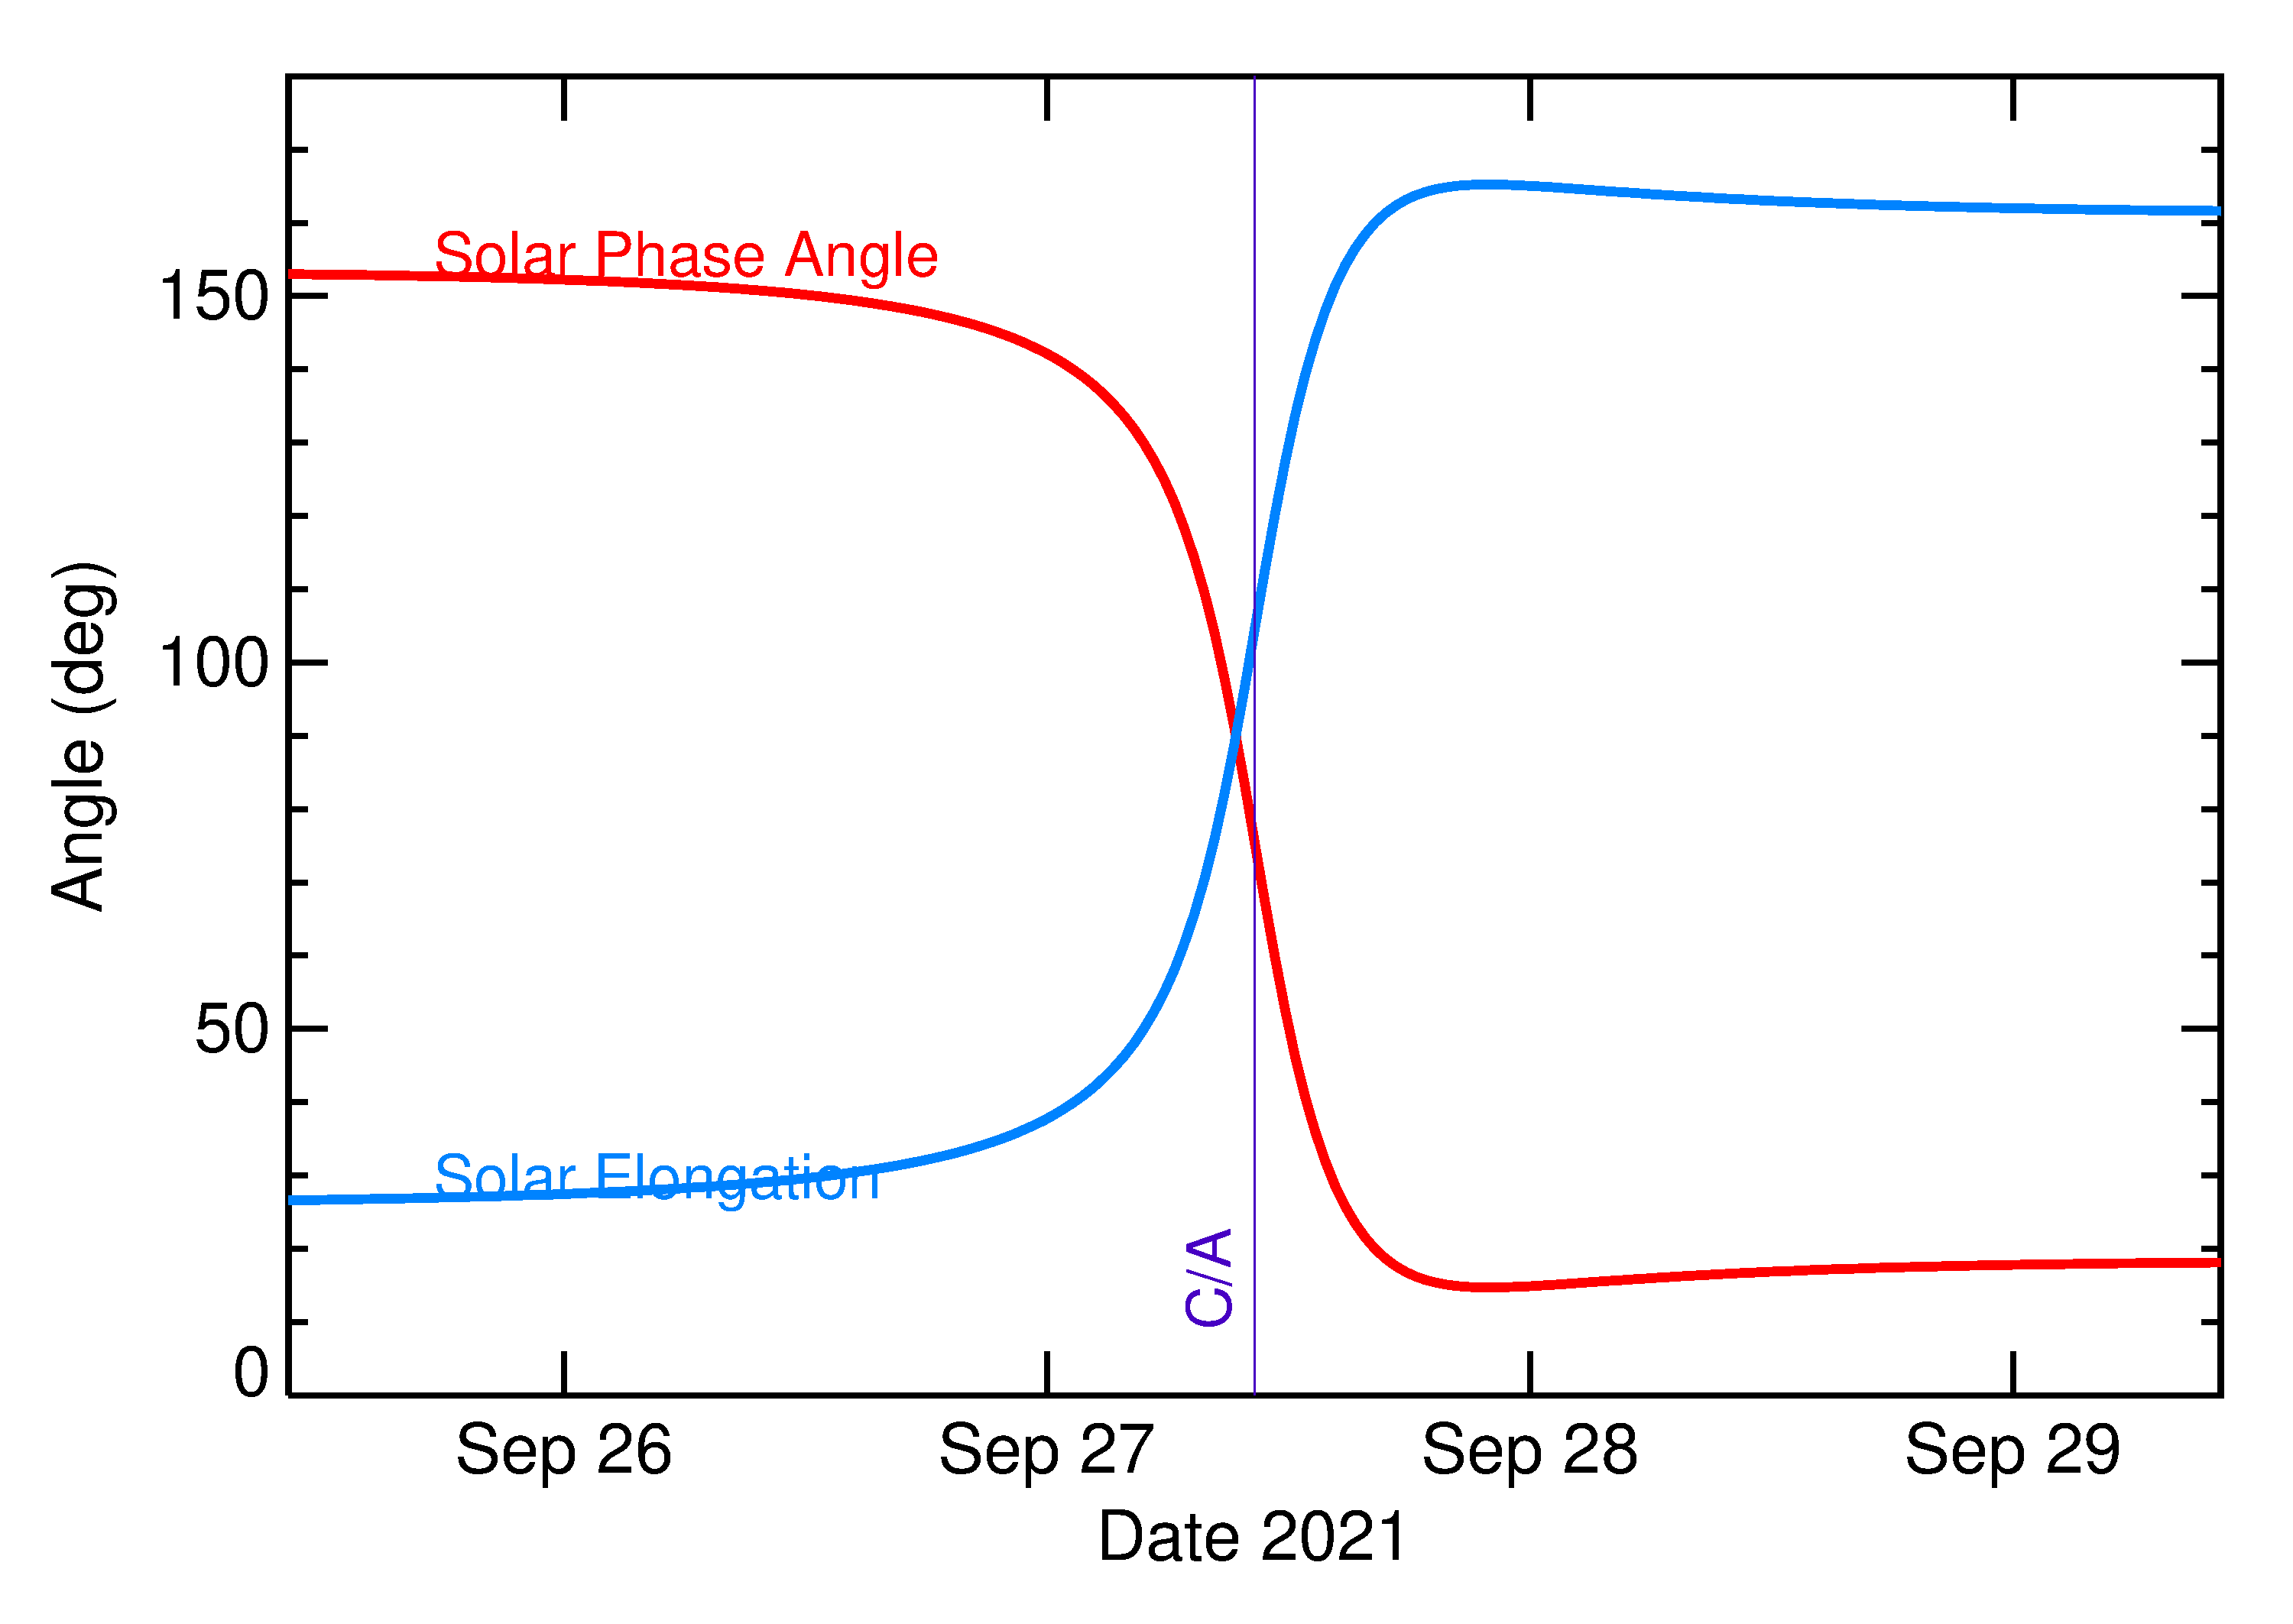 Solar Elongation and Solar Phase Angle of 2021 SQ1 in the days around closest approach